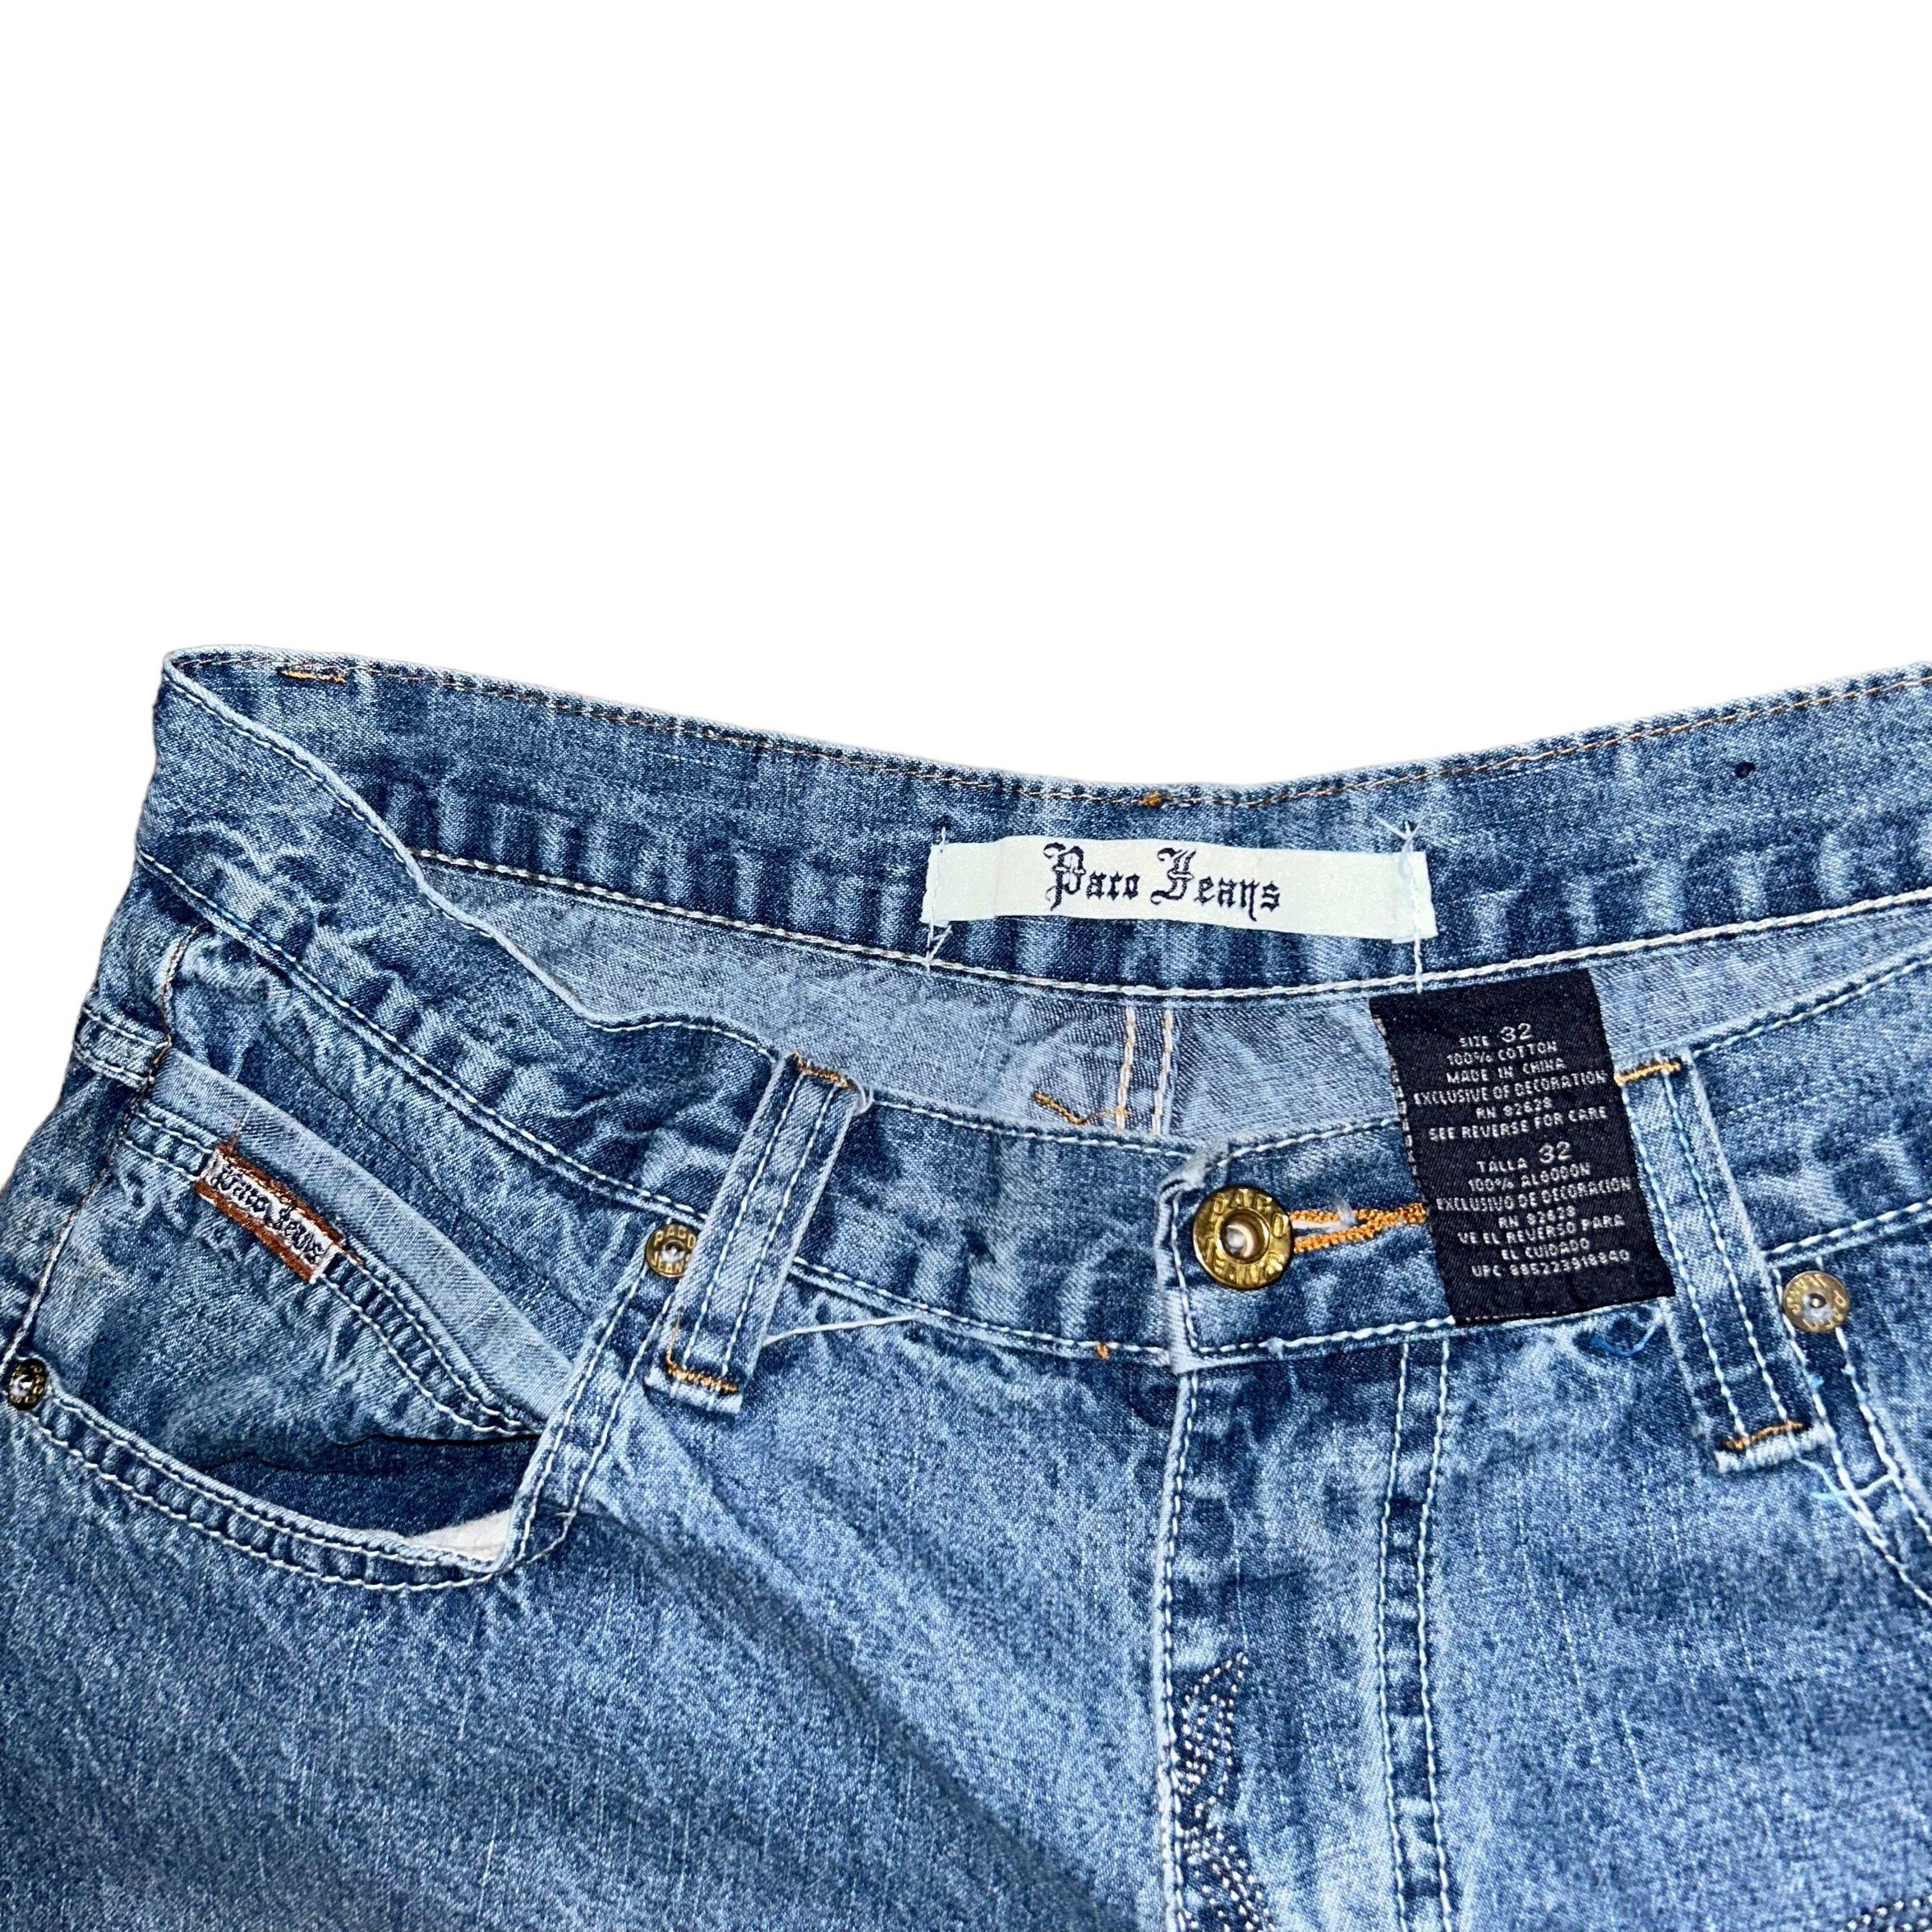 Baggy Shorts PACO JEANS  (32 USA  M)